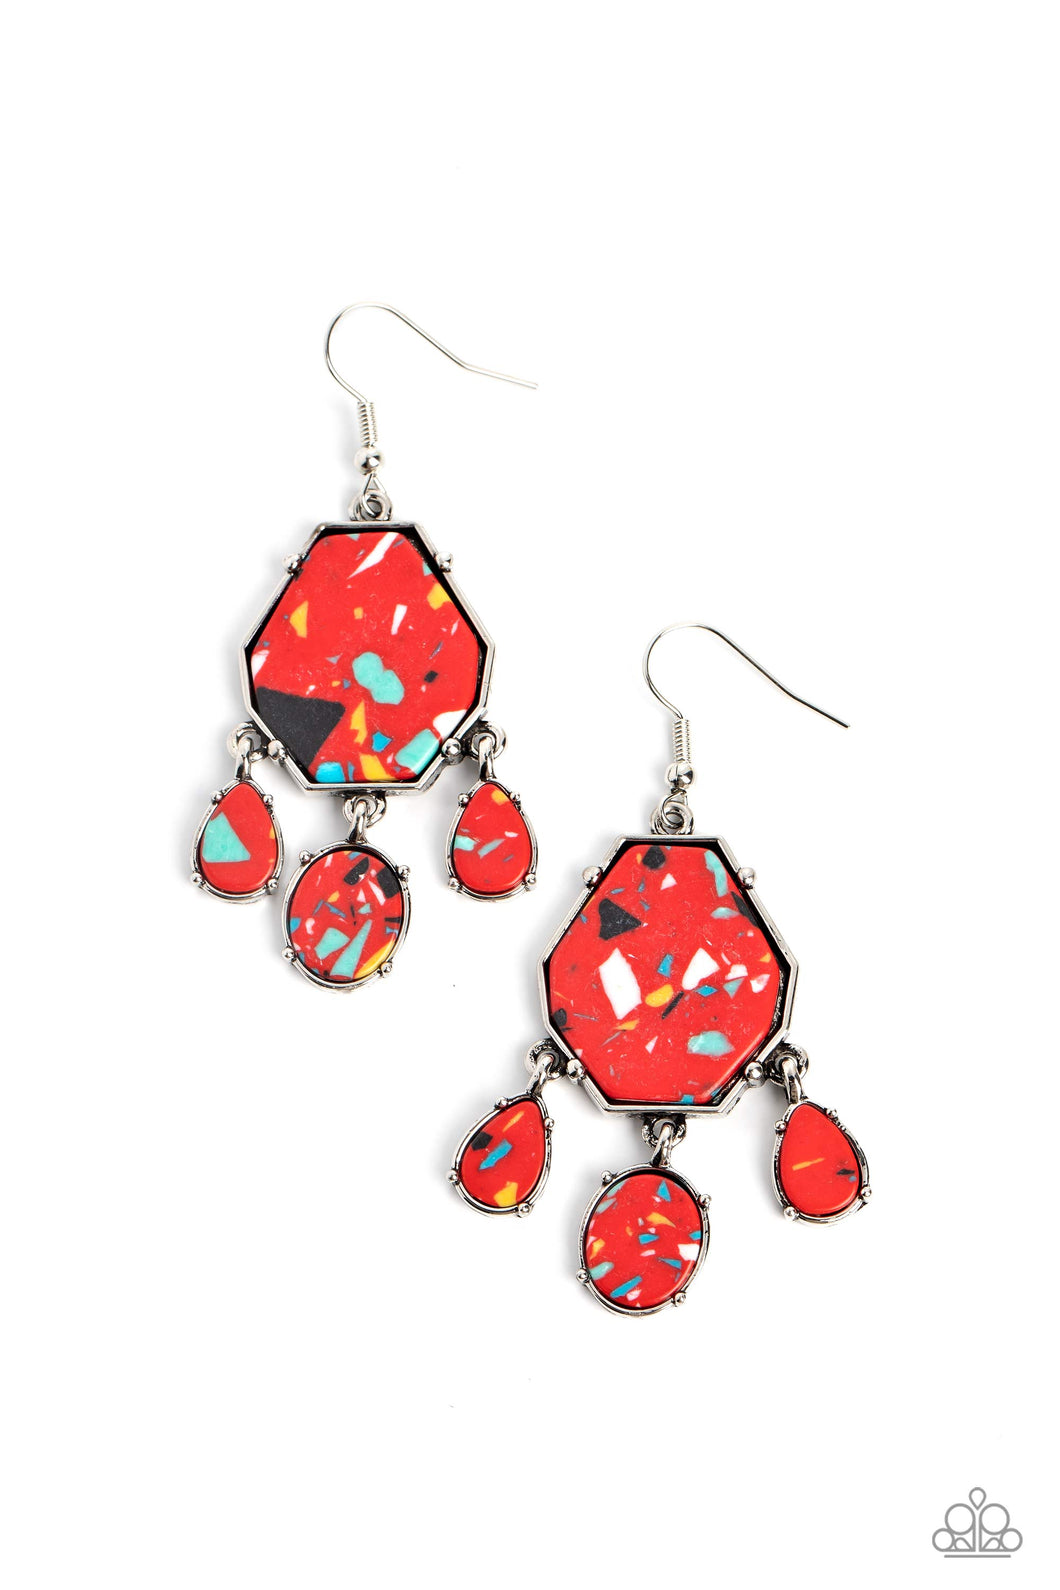 oak-sisters-jewelry-organic-optimism-red-paparazzi-accessories-by-lisa